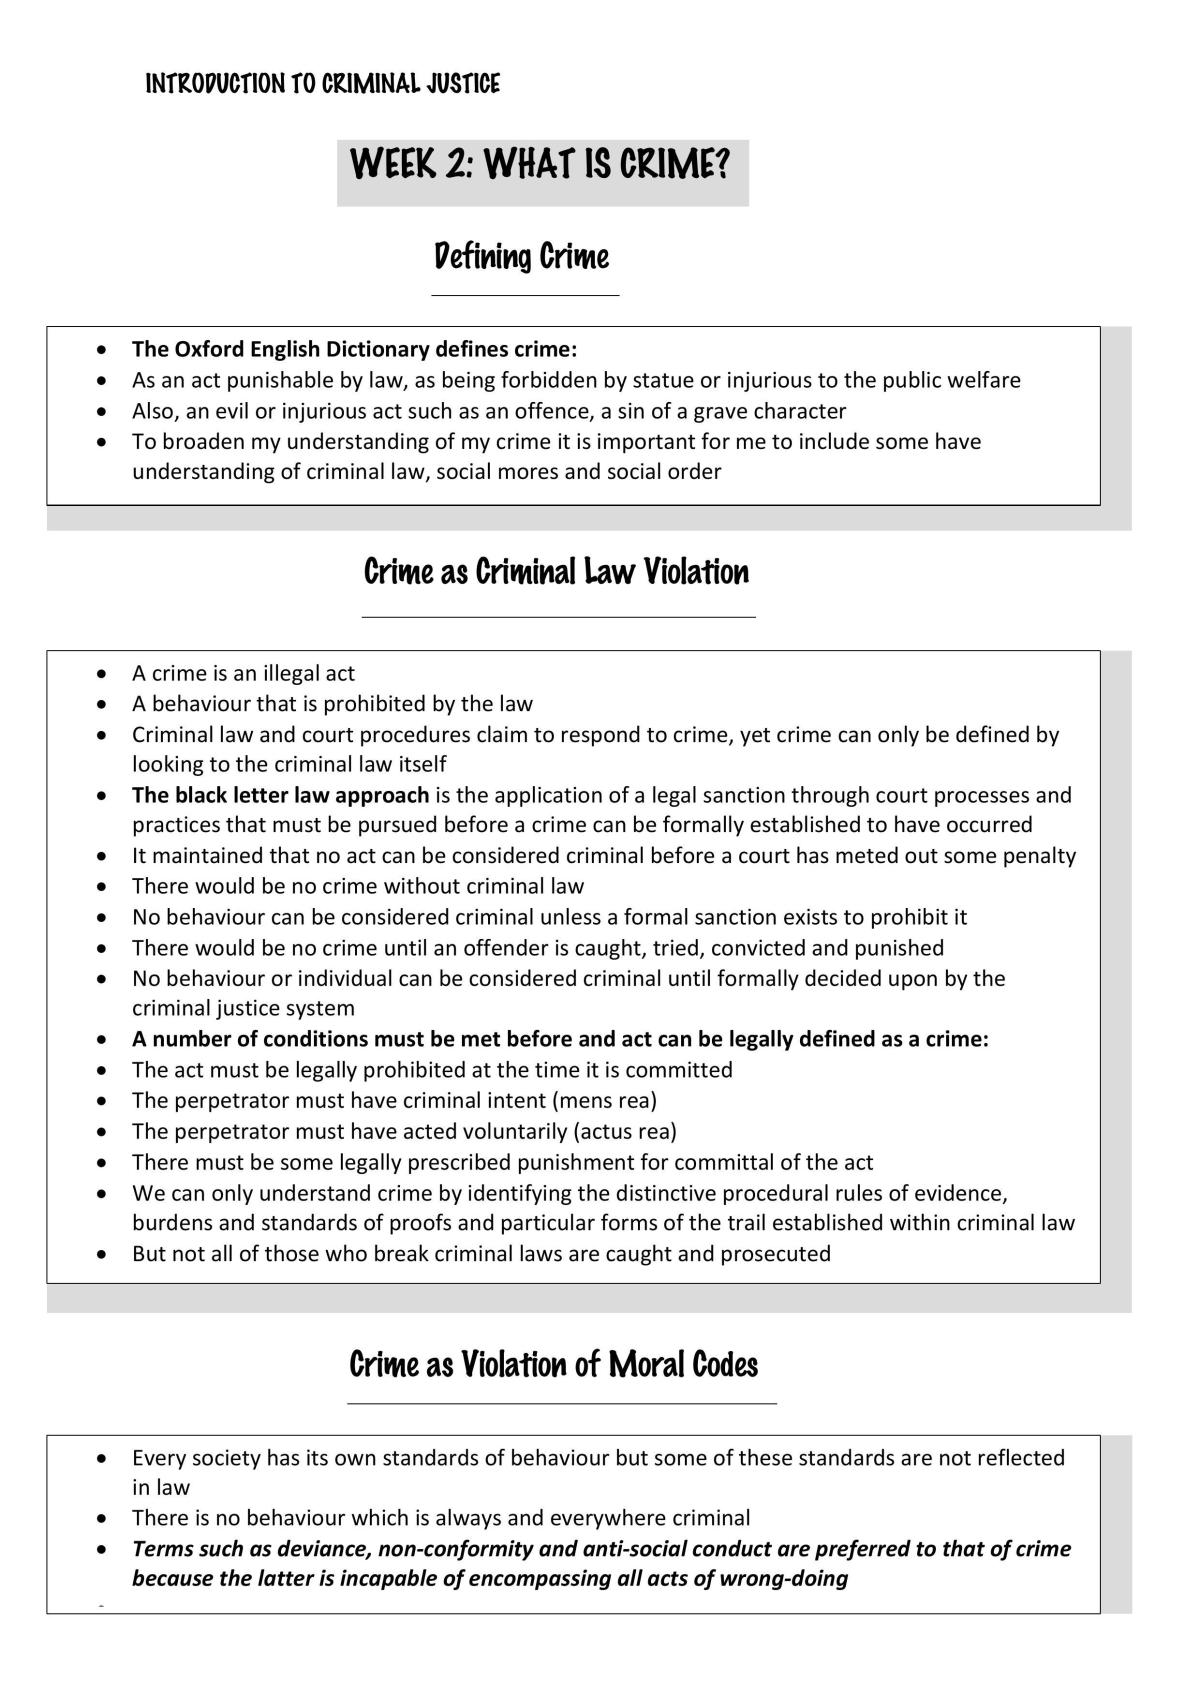 Introduction to Criminal Justice HD Notes - Page 1